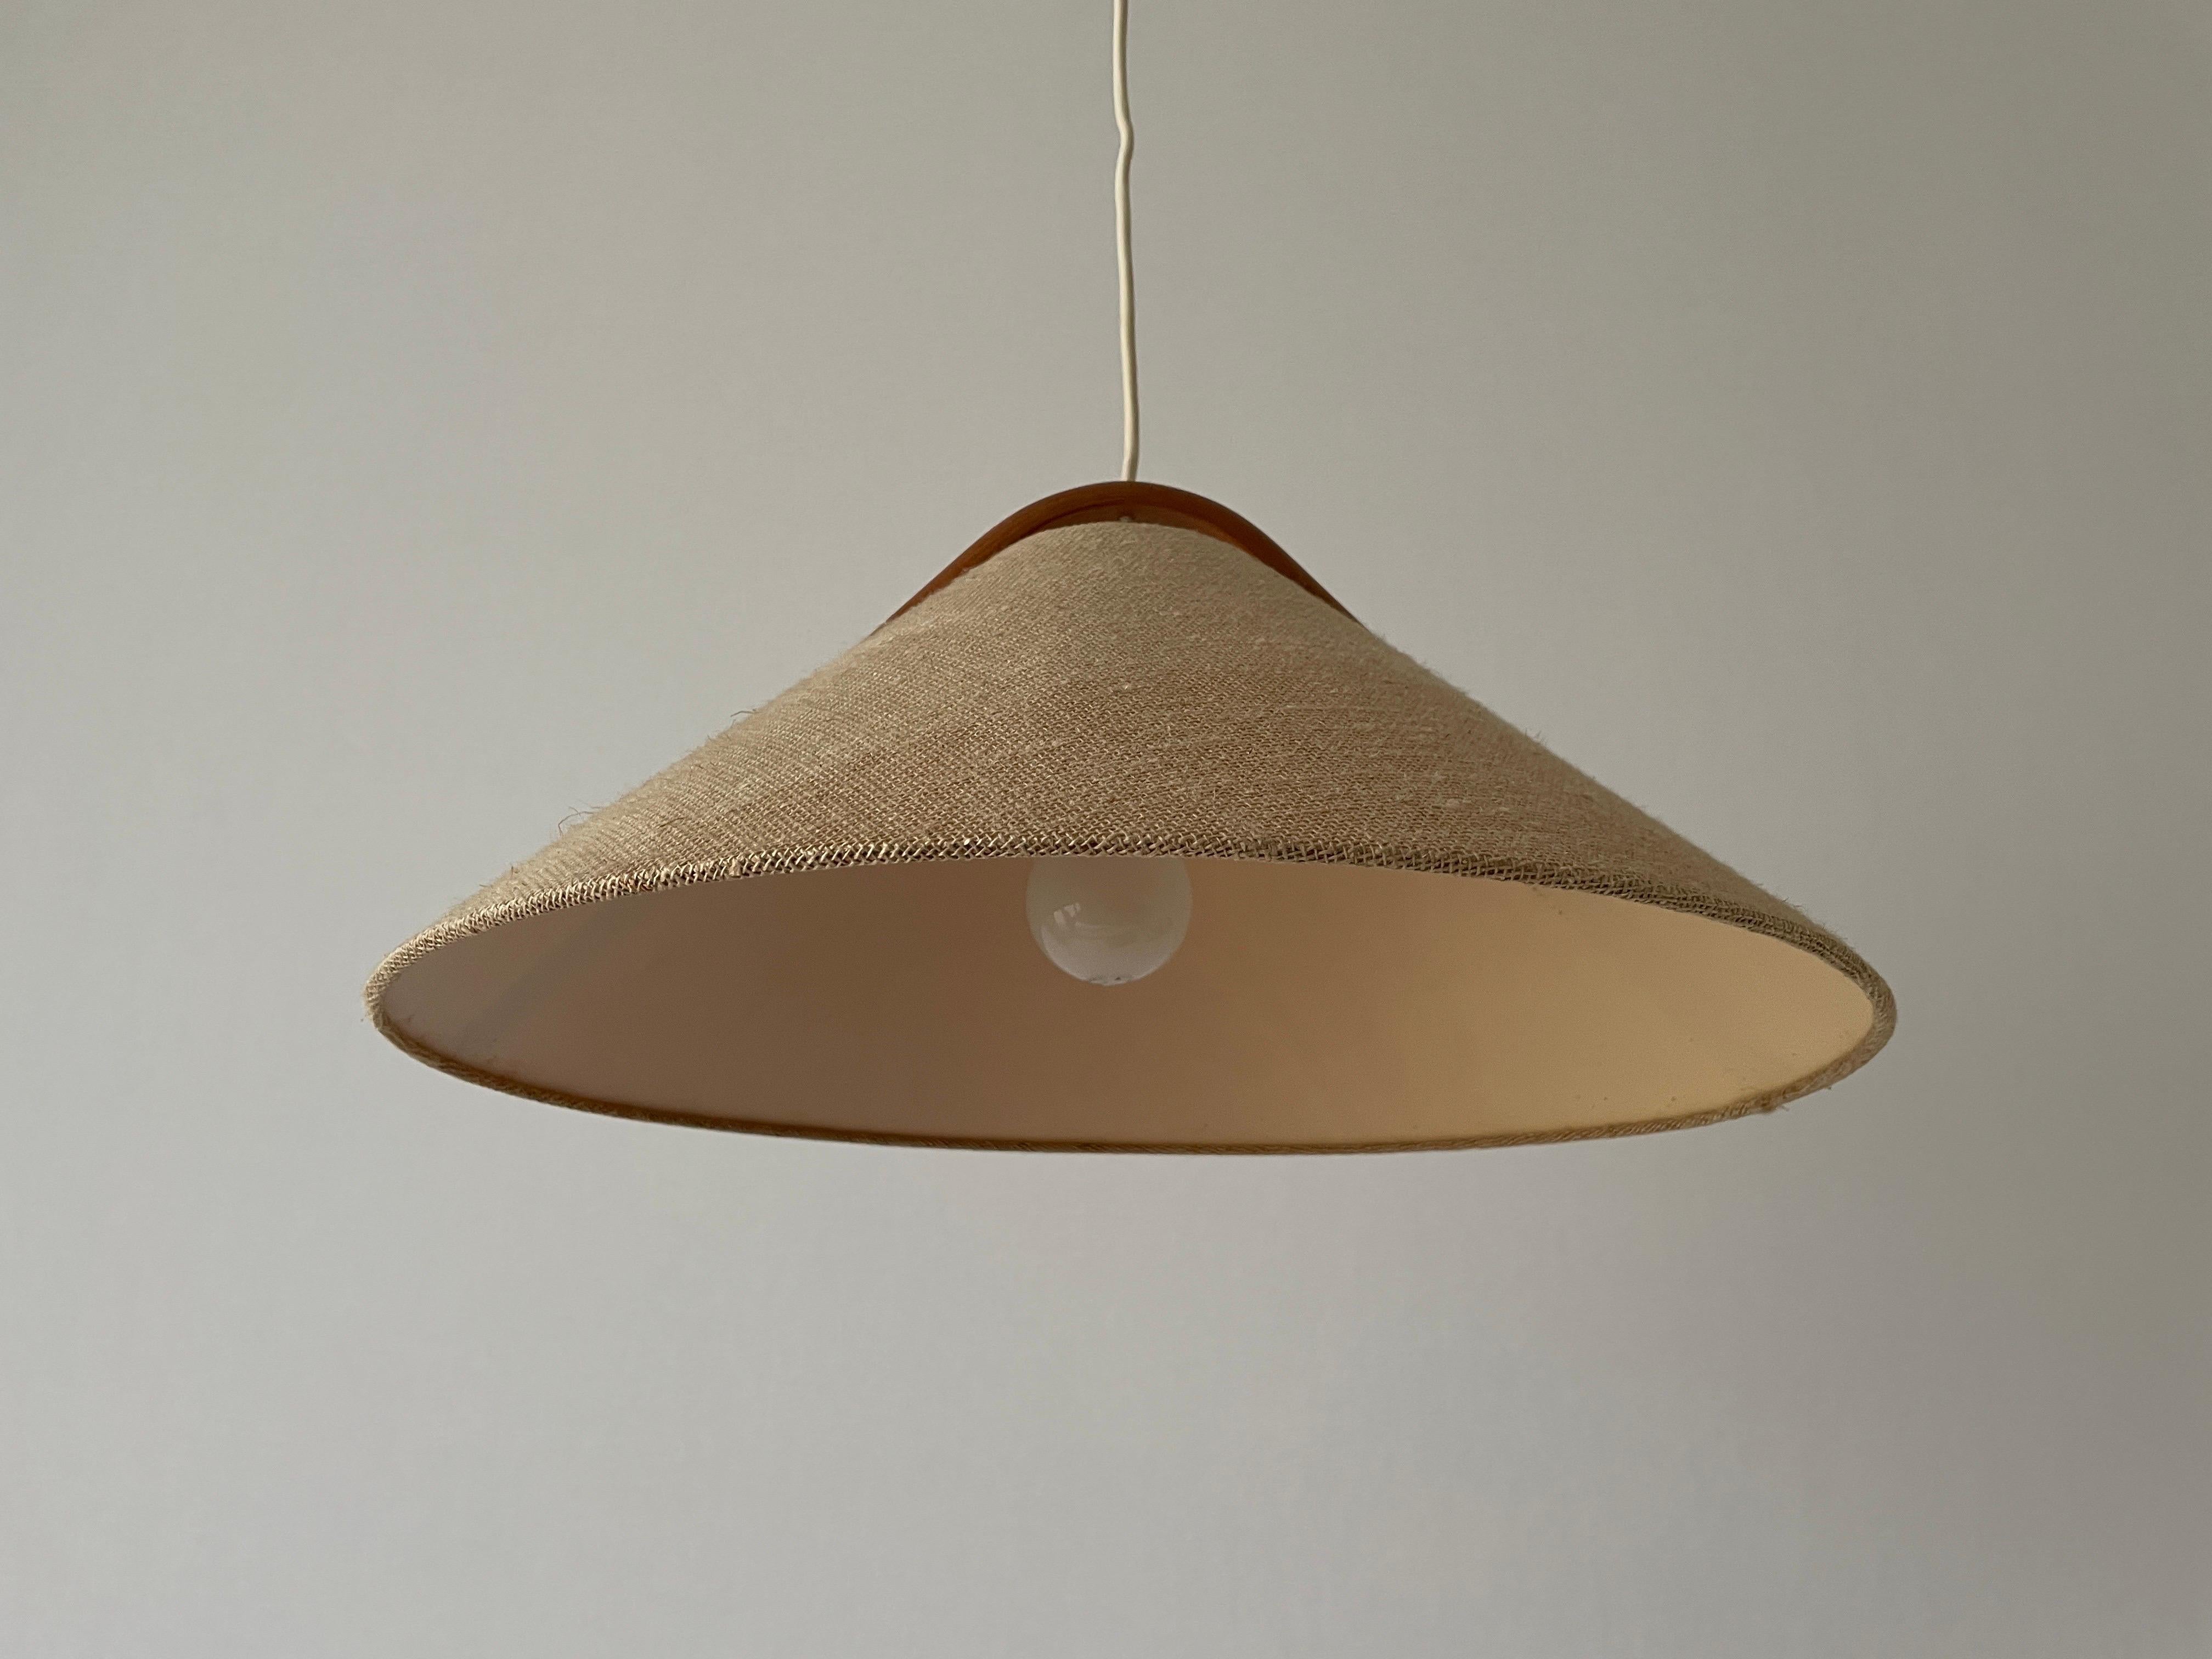 Conic Design Fabric Pendant Lamp with Teak Detail, 1960s, Germany

Minimalist and rare design. 

Lampshade is in good condition and clean. 
This lamp works with E27 light bulb. 
Max 100W Wired and suitable to use with 220V and 110V for all